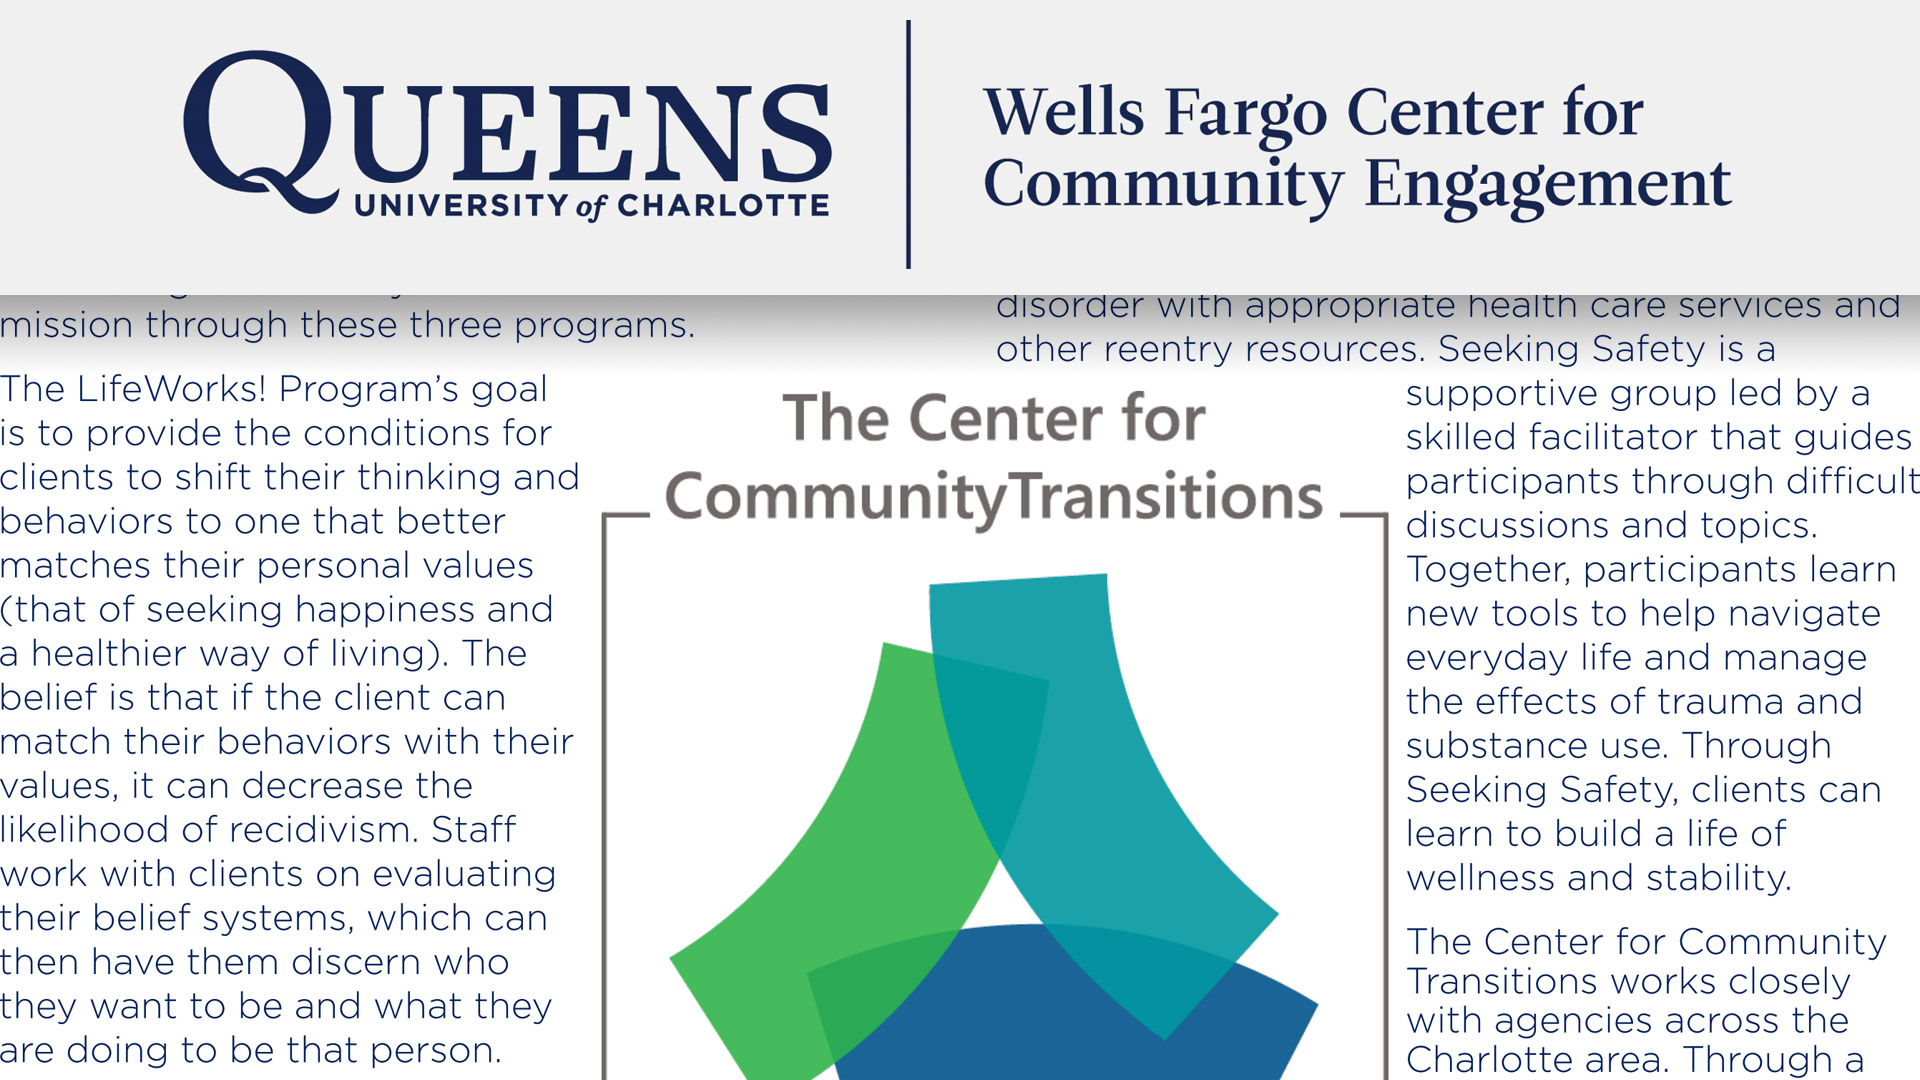 CCT + Wells Fargo Center for Community Engagement + Queens University = Dynamic and sustainable partnership